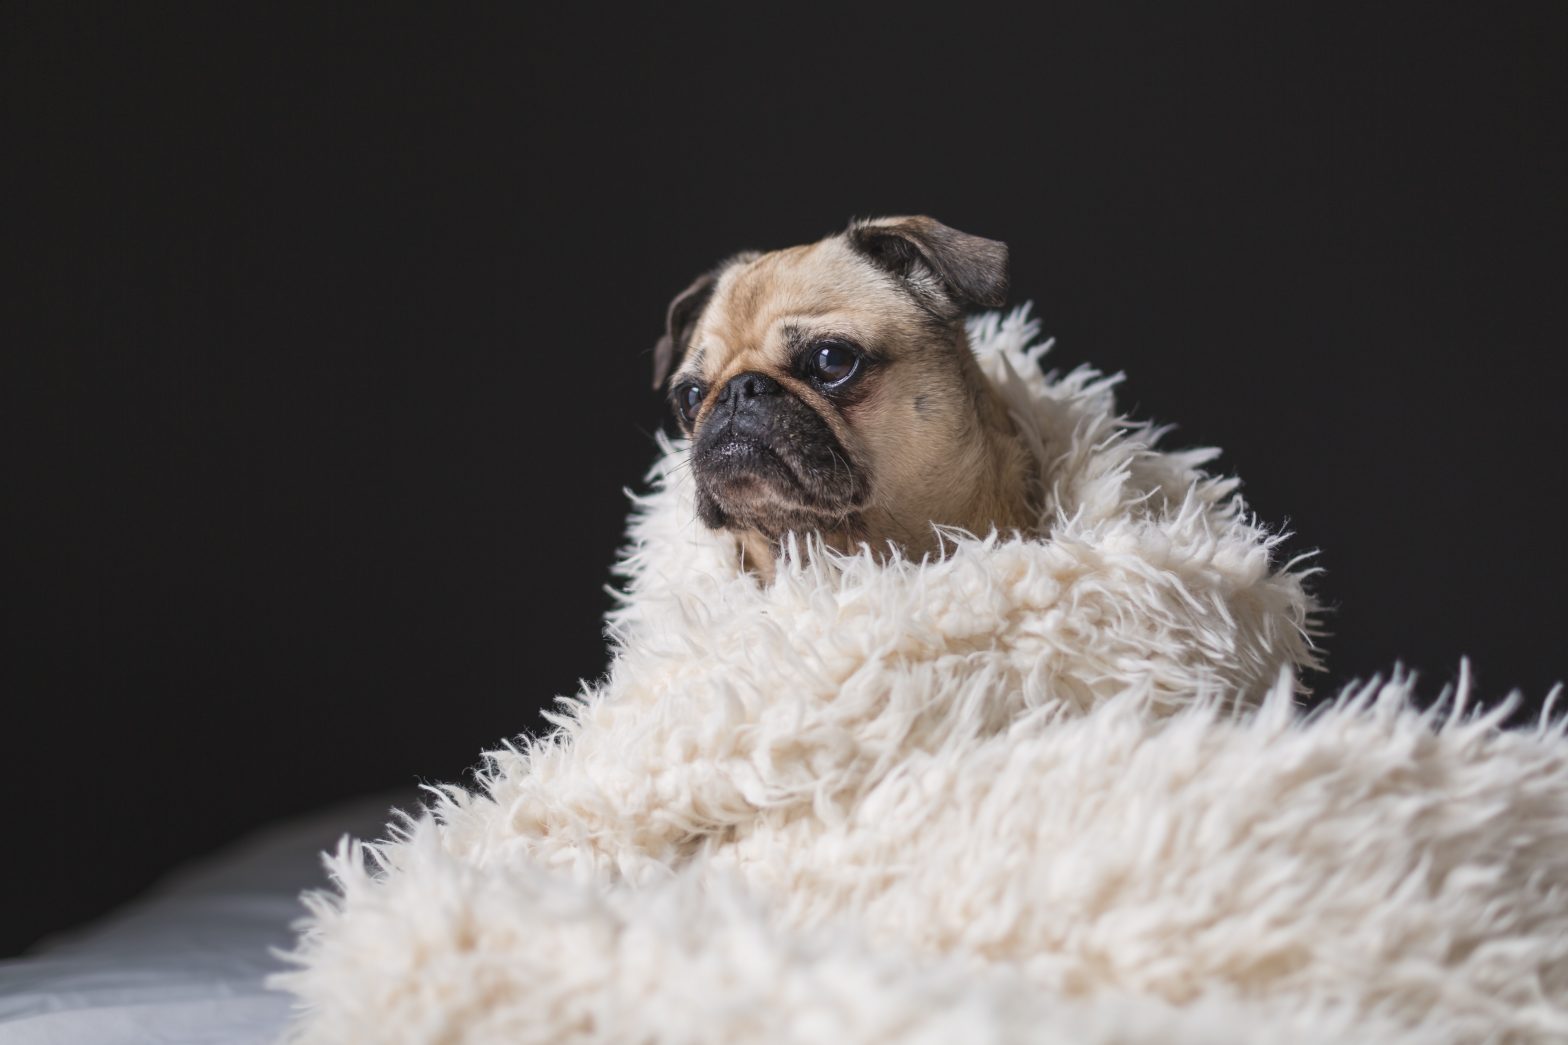 Majestic pug dog wrapped in a fluffy blanket